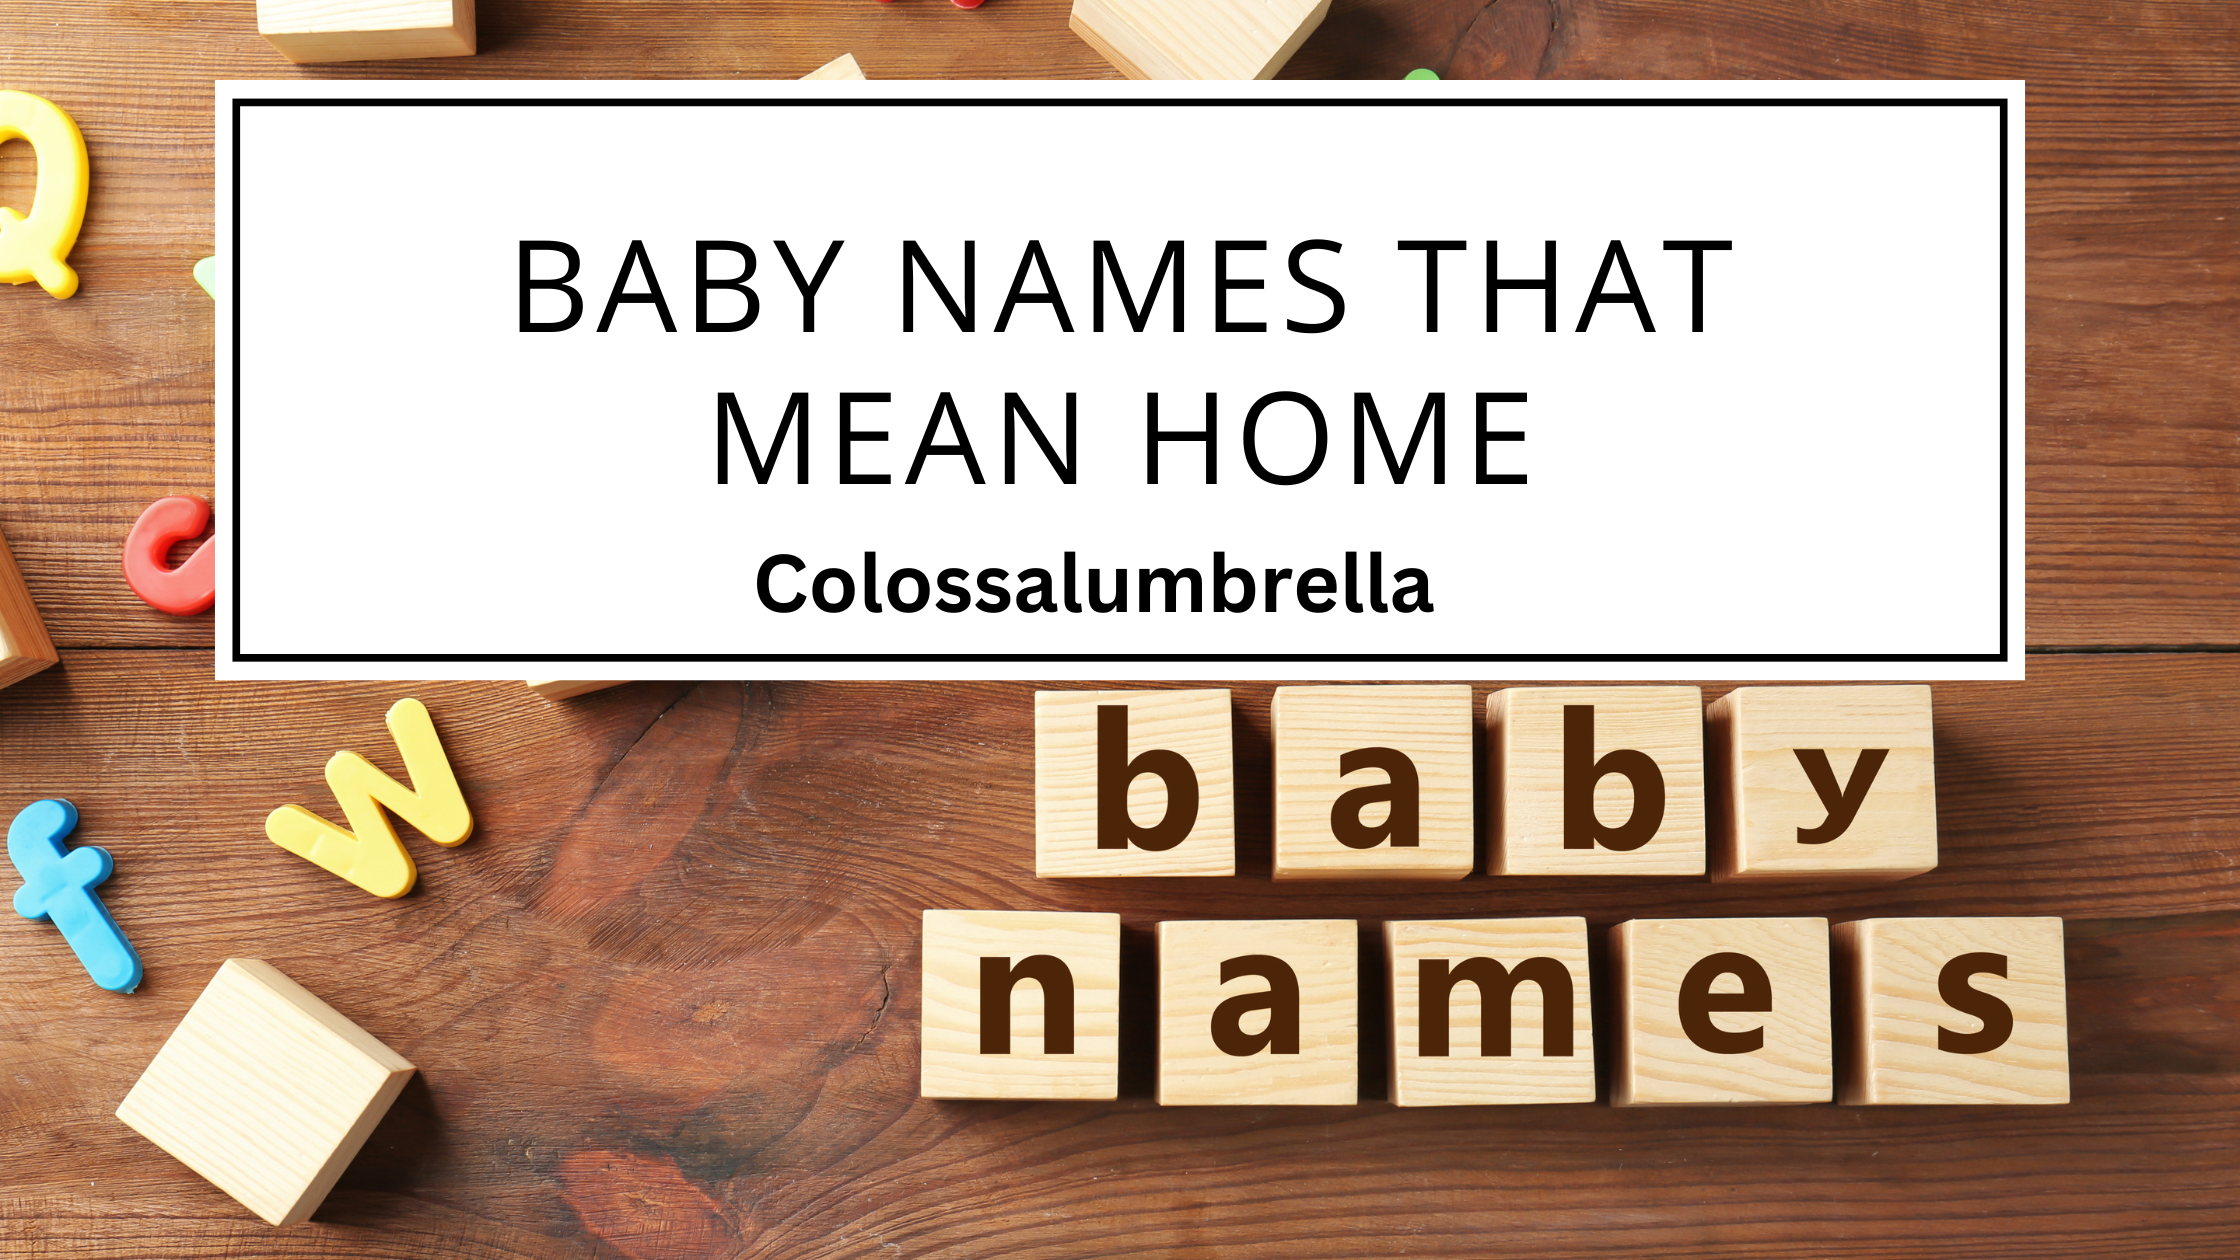 100 Unique and warm Names That Mean Home from around the world